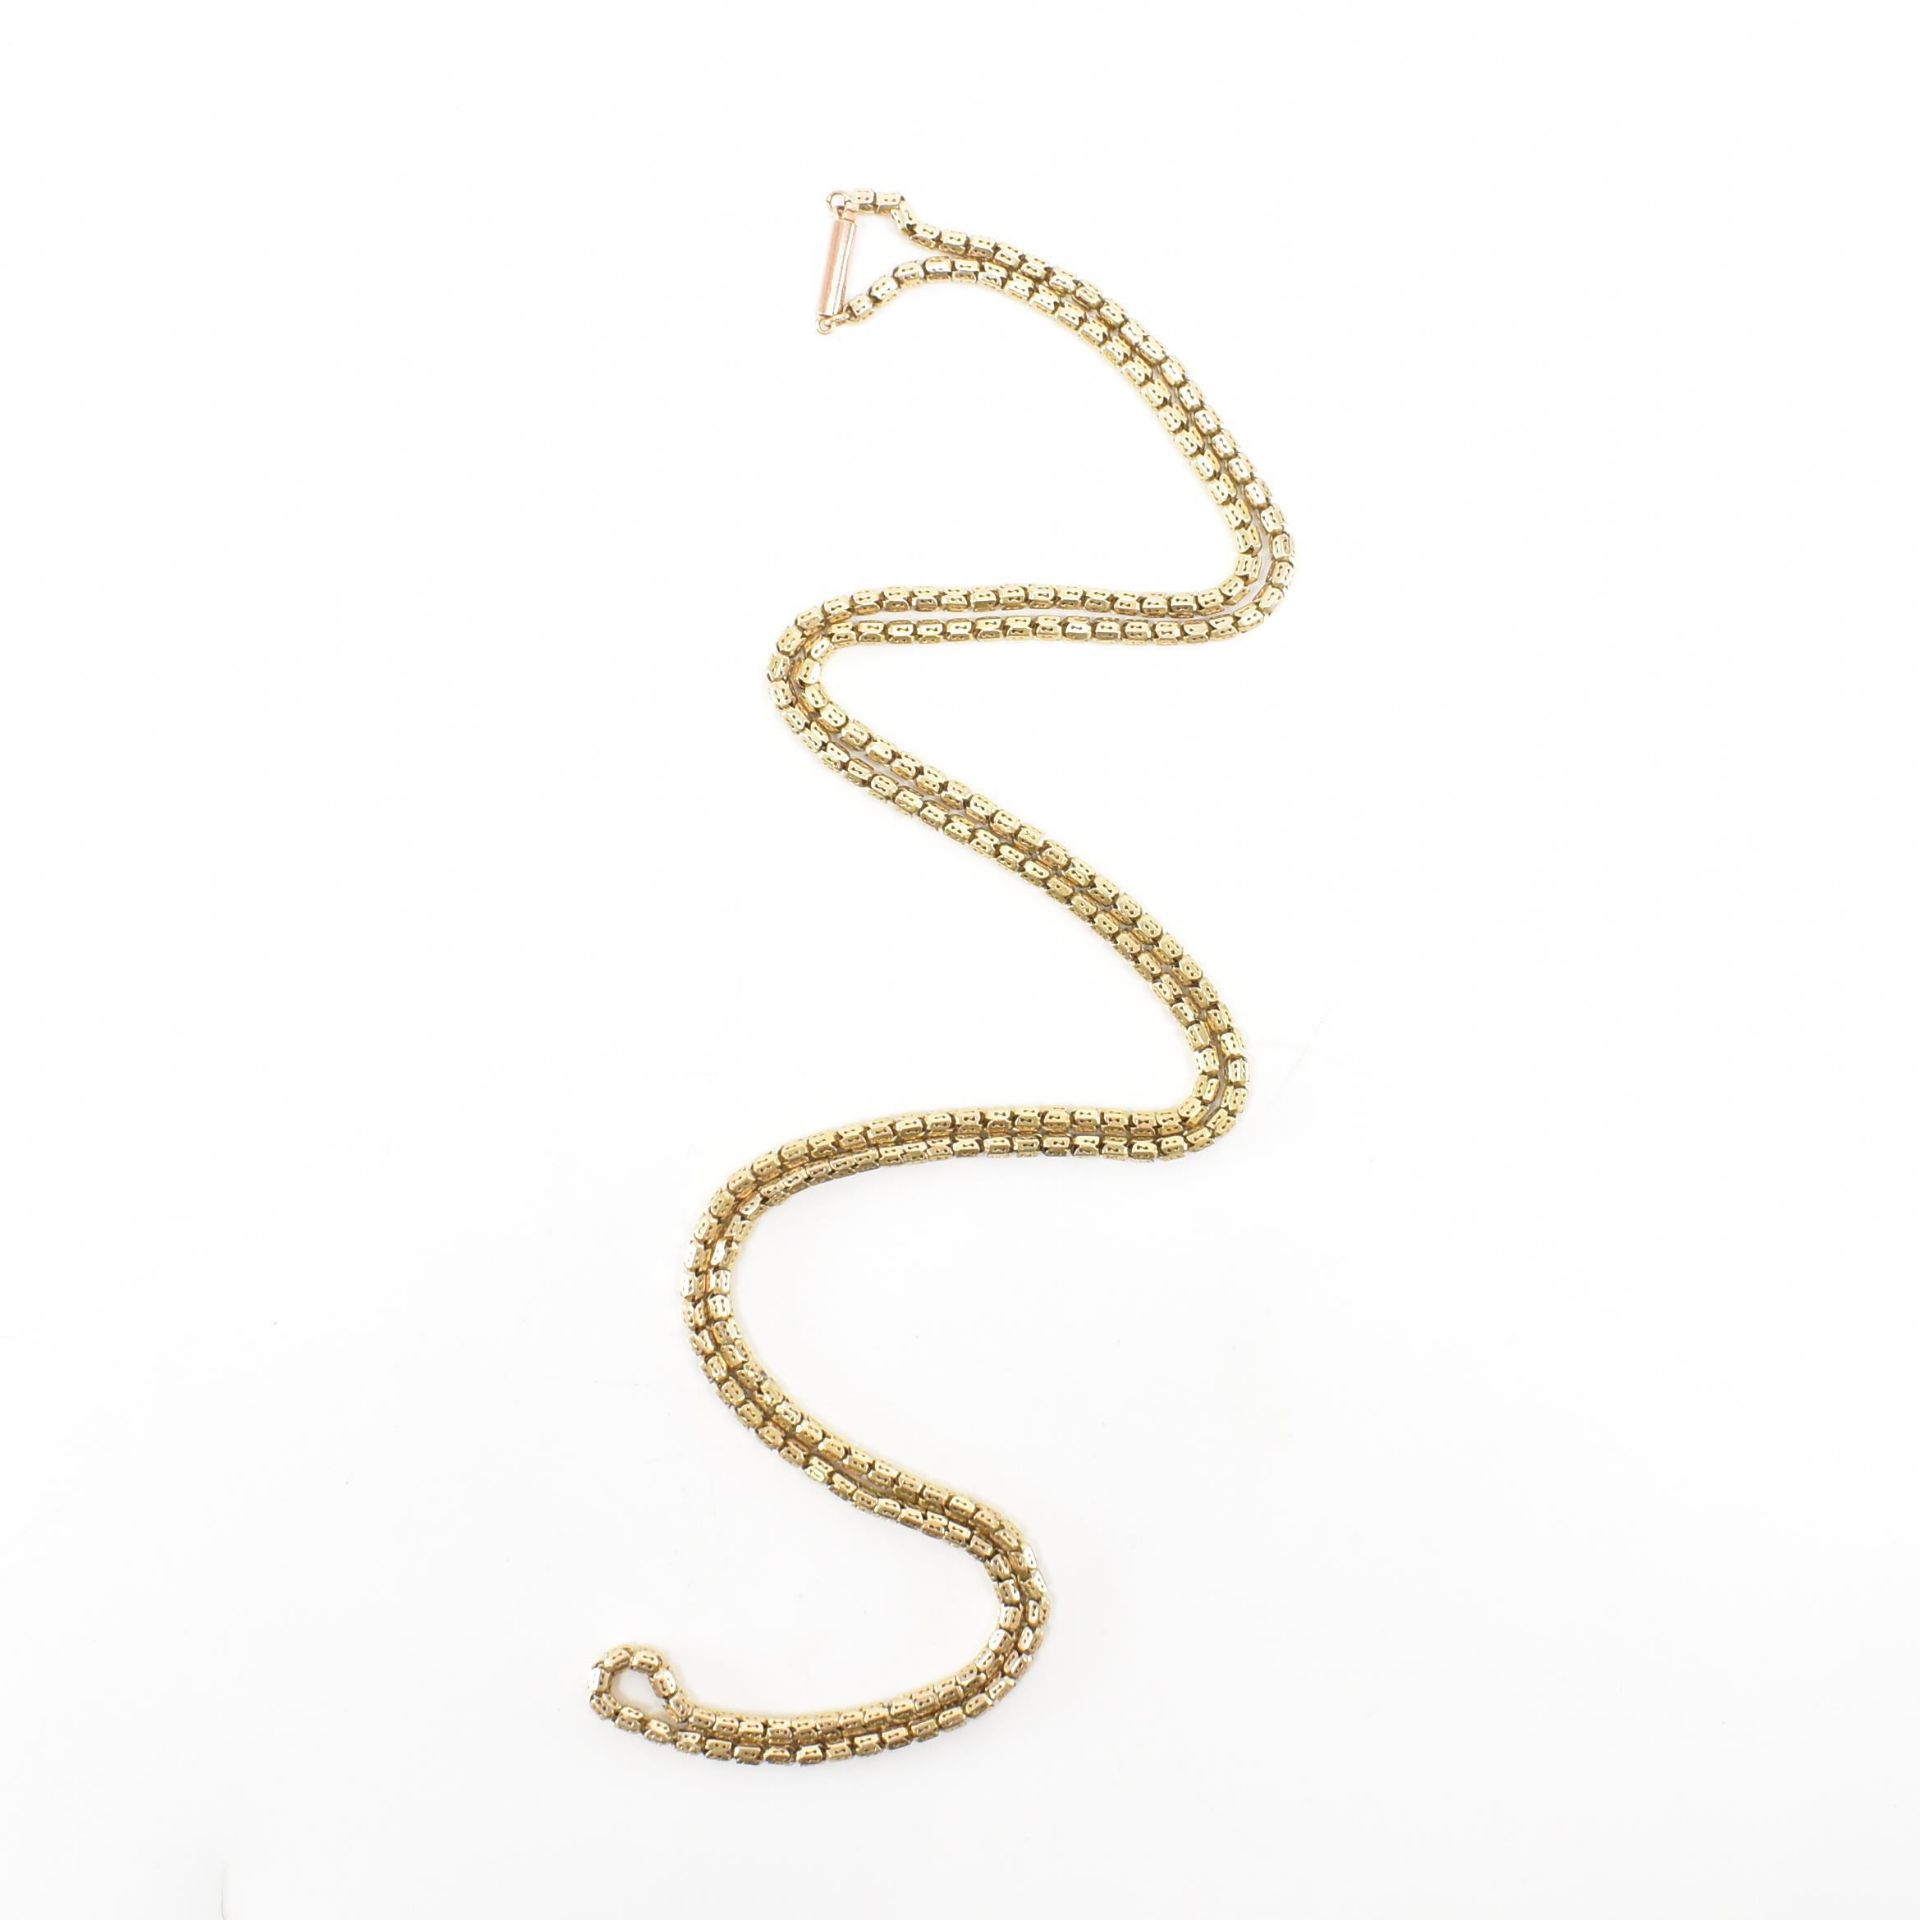 VINTAGE 9CT GOLD FANCY LINK CHAIN NECKLACE - Image 3 of 3